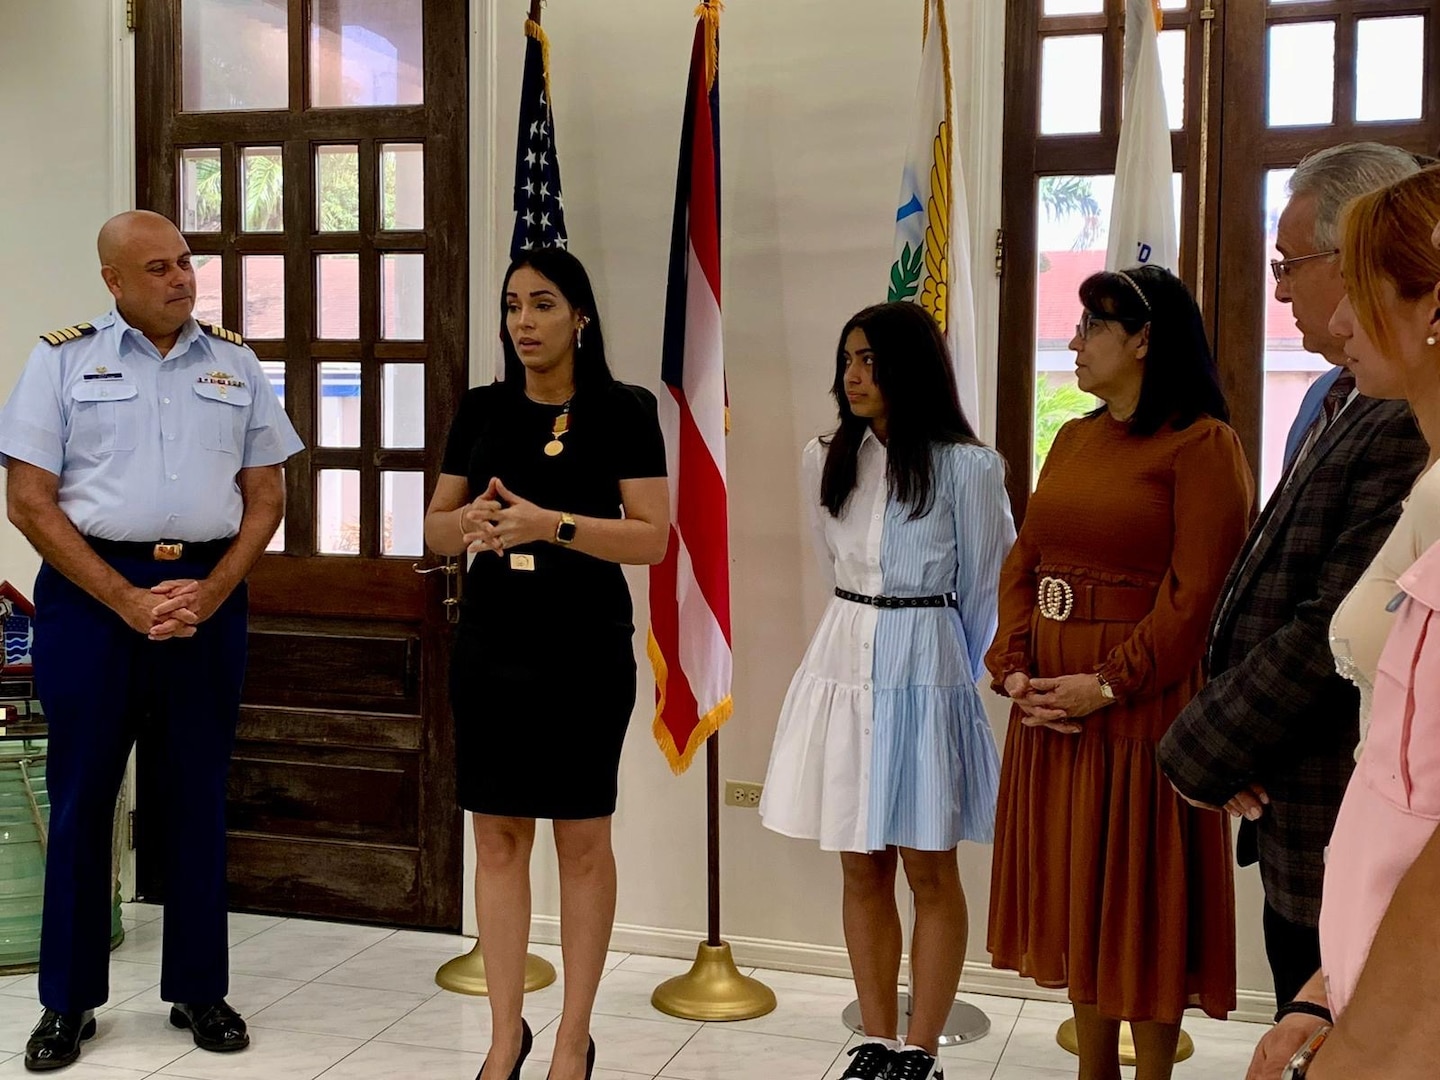 The Coast Guard presented the Gold Life Saving Medal to a Puerto Rican woman at Coast Guard Base San Juan, April 26, 2024. Aivelyn Díaz Rosado, 39, a resident of Toa Baja, Puerto Rico, was awarded the Gold Lifesaving Medal for her heroic actions on April 21, 2014, in which three children were saved from strong rip currents off a beach in Dorado, Puerto Rico.